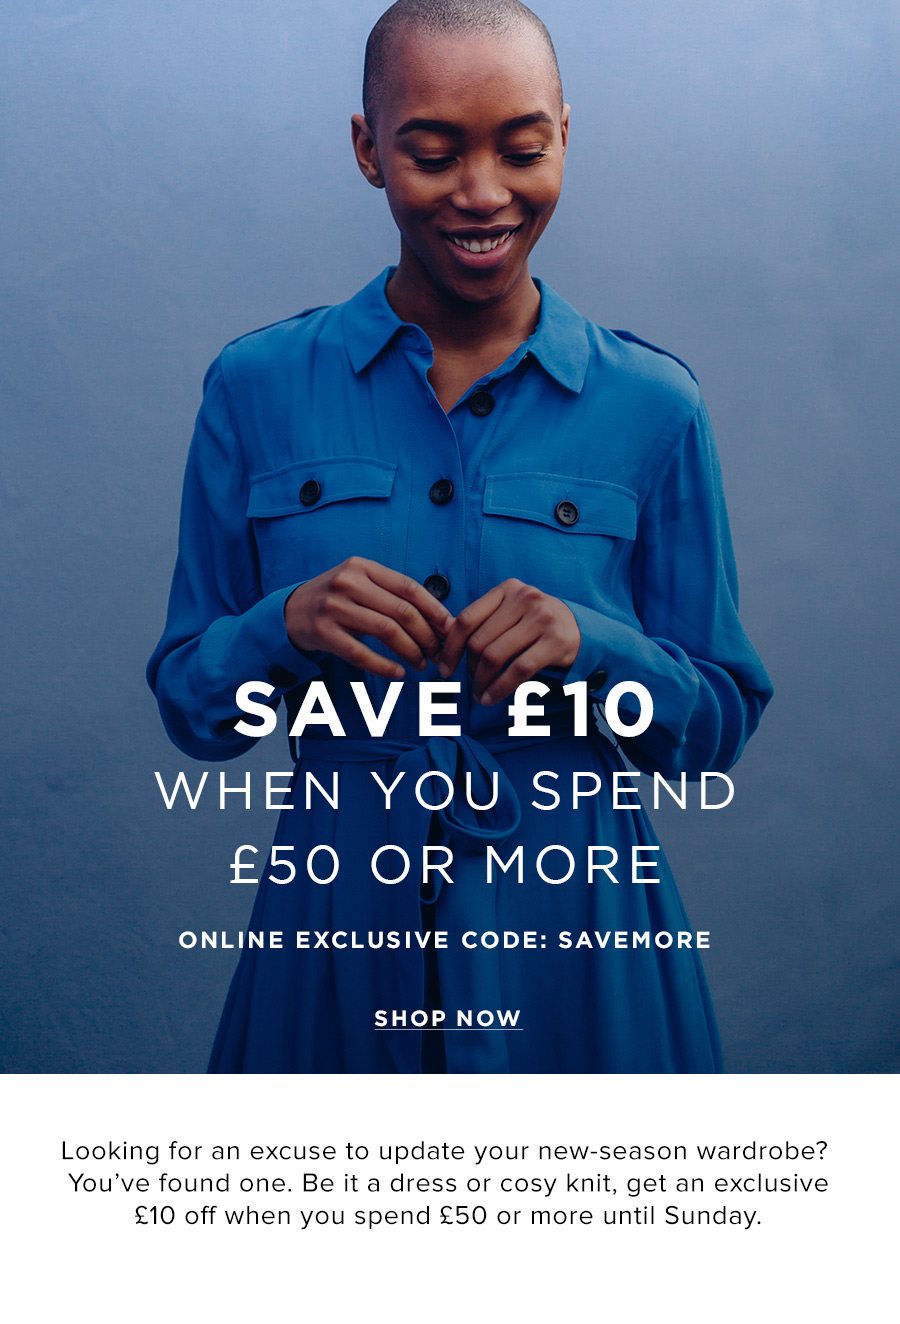 Save £10 When You Spend £50 or More Online and In Store Ends Sunday